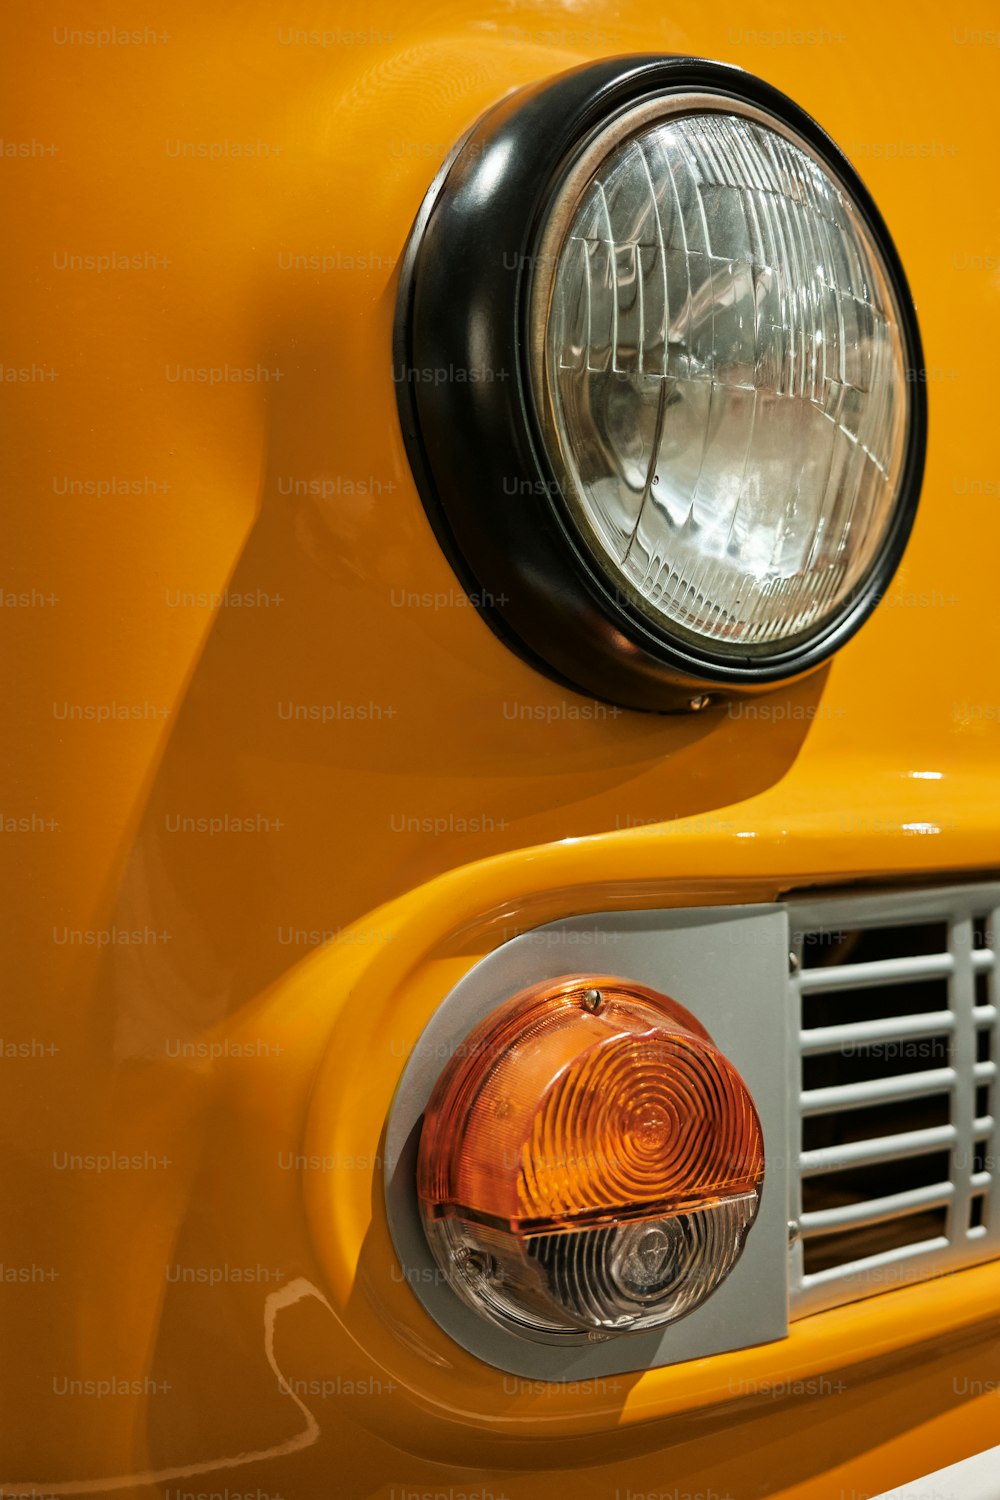 a close up of the front of a yellow truck